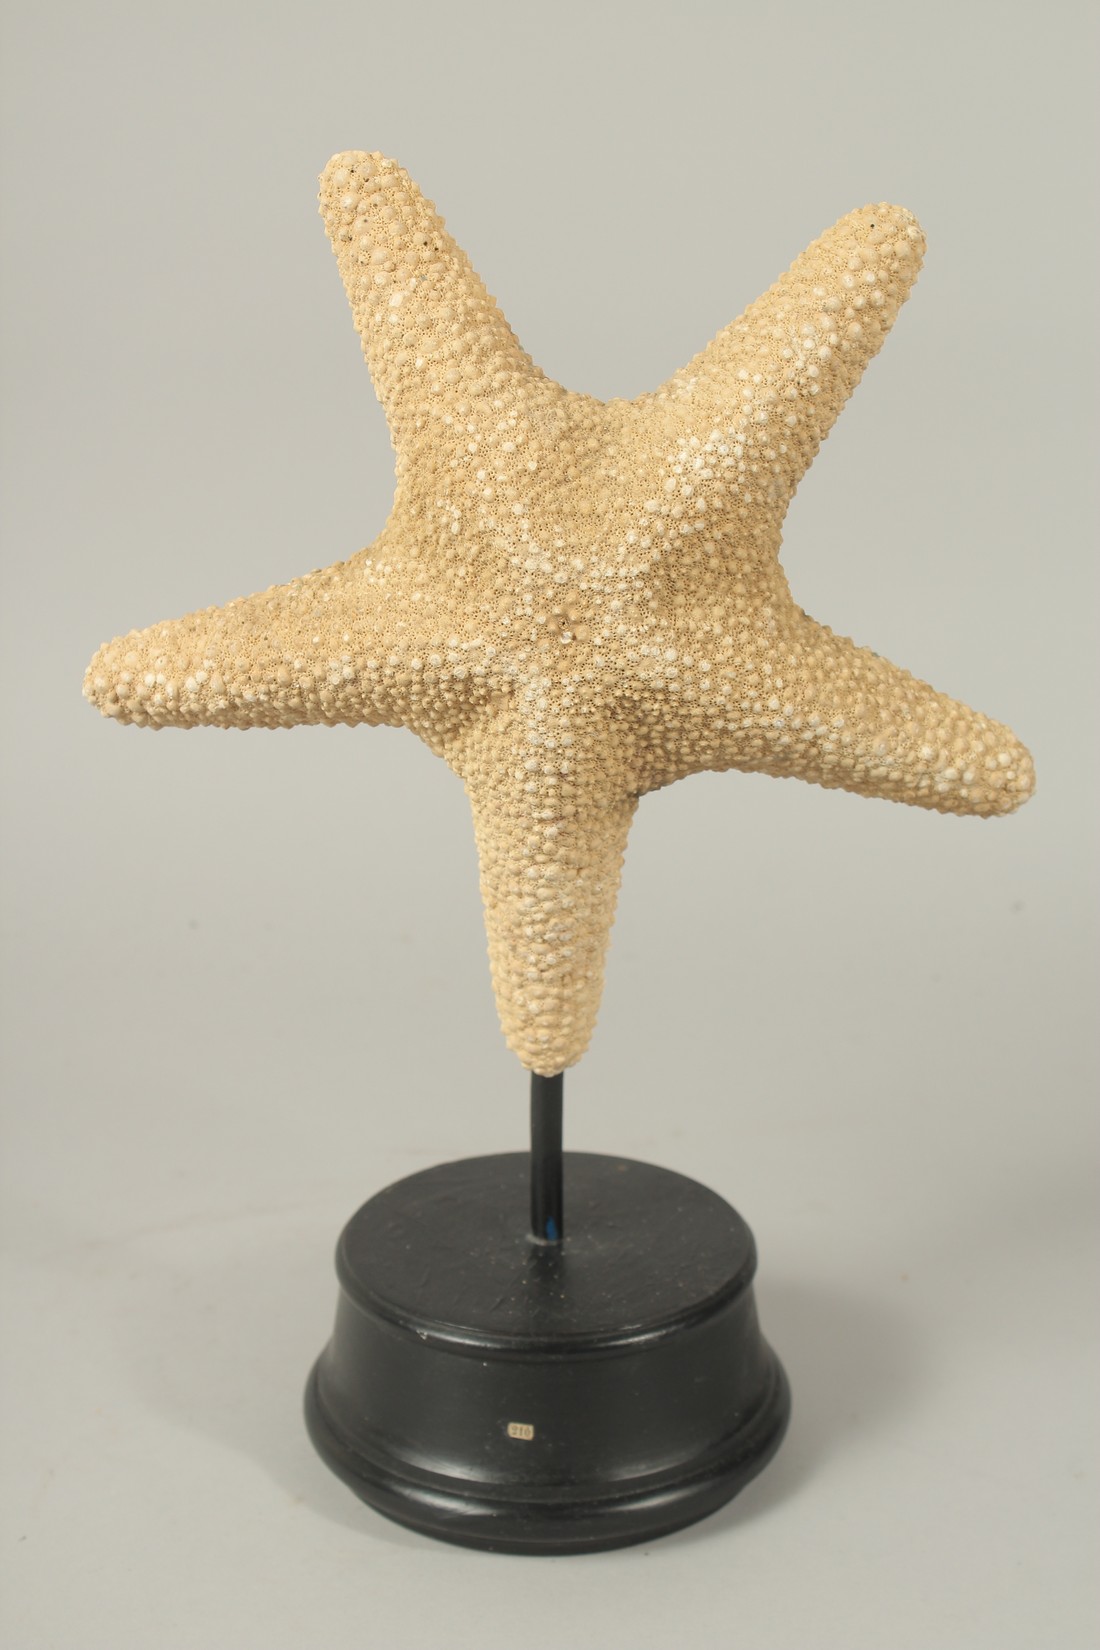 A STAR FISH SPECIMEN on a stand.